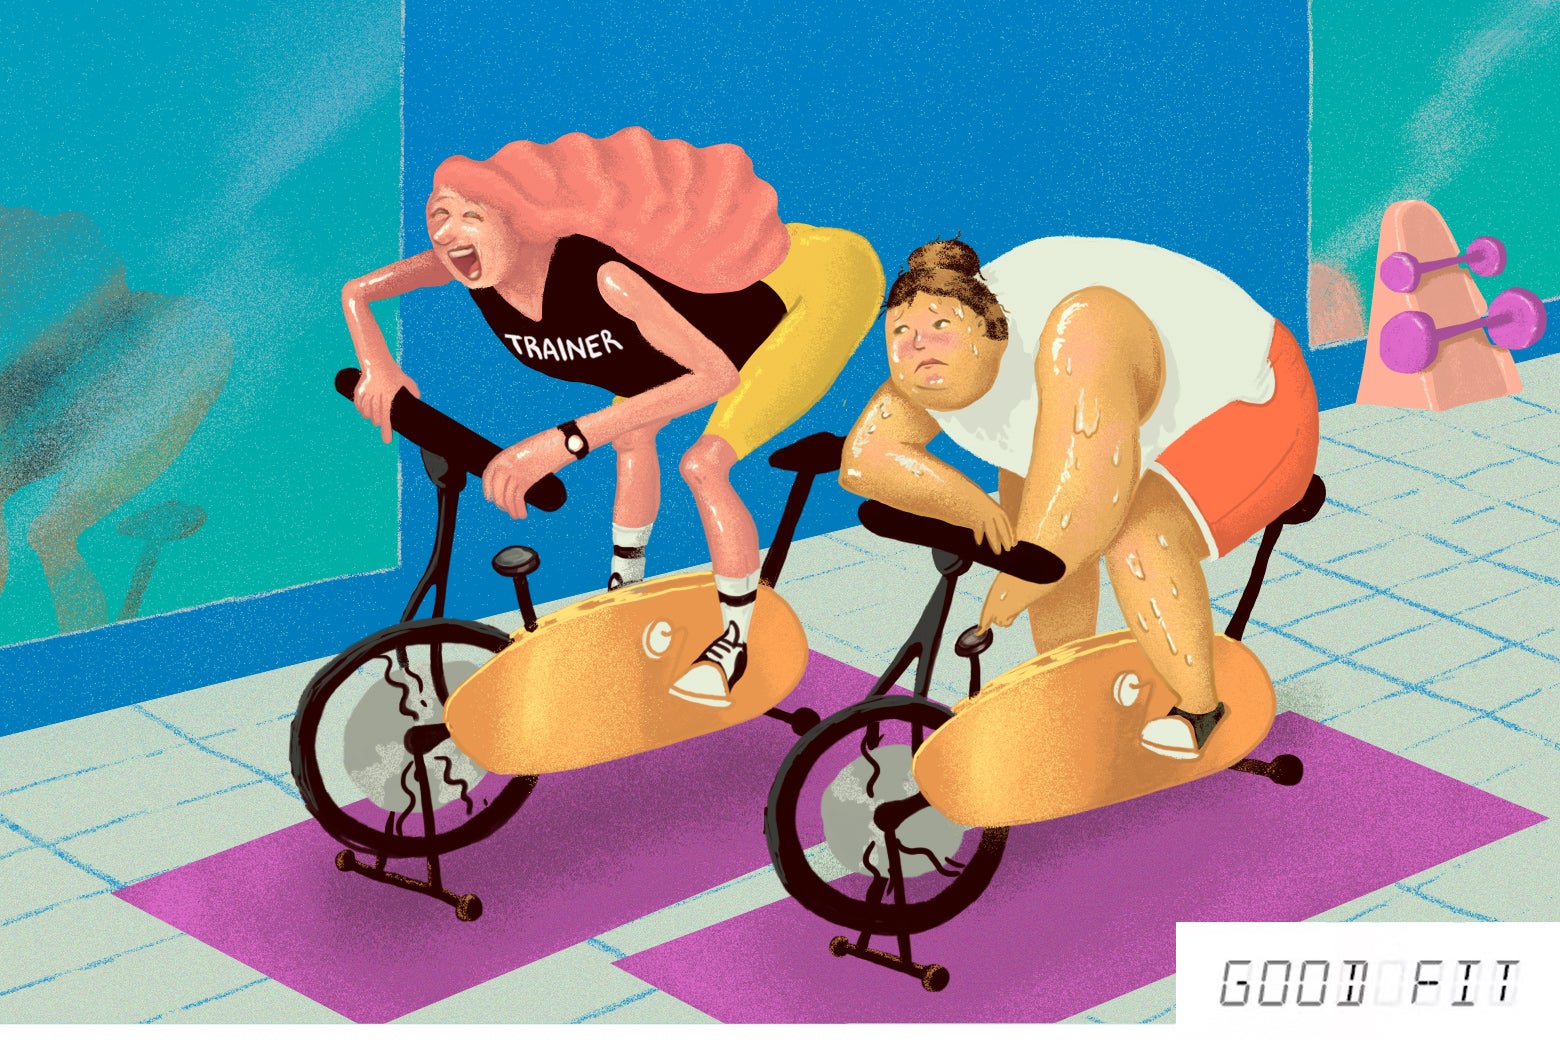 Two people on spin bikes. One is wearing a shirt that says "trainer" and is having a great time! The other person is miserable. 